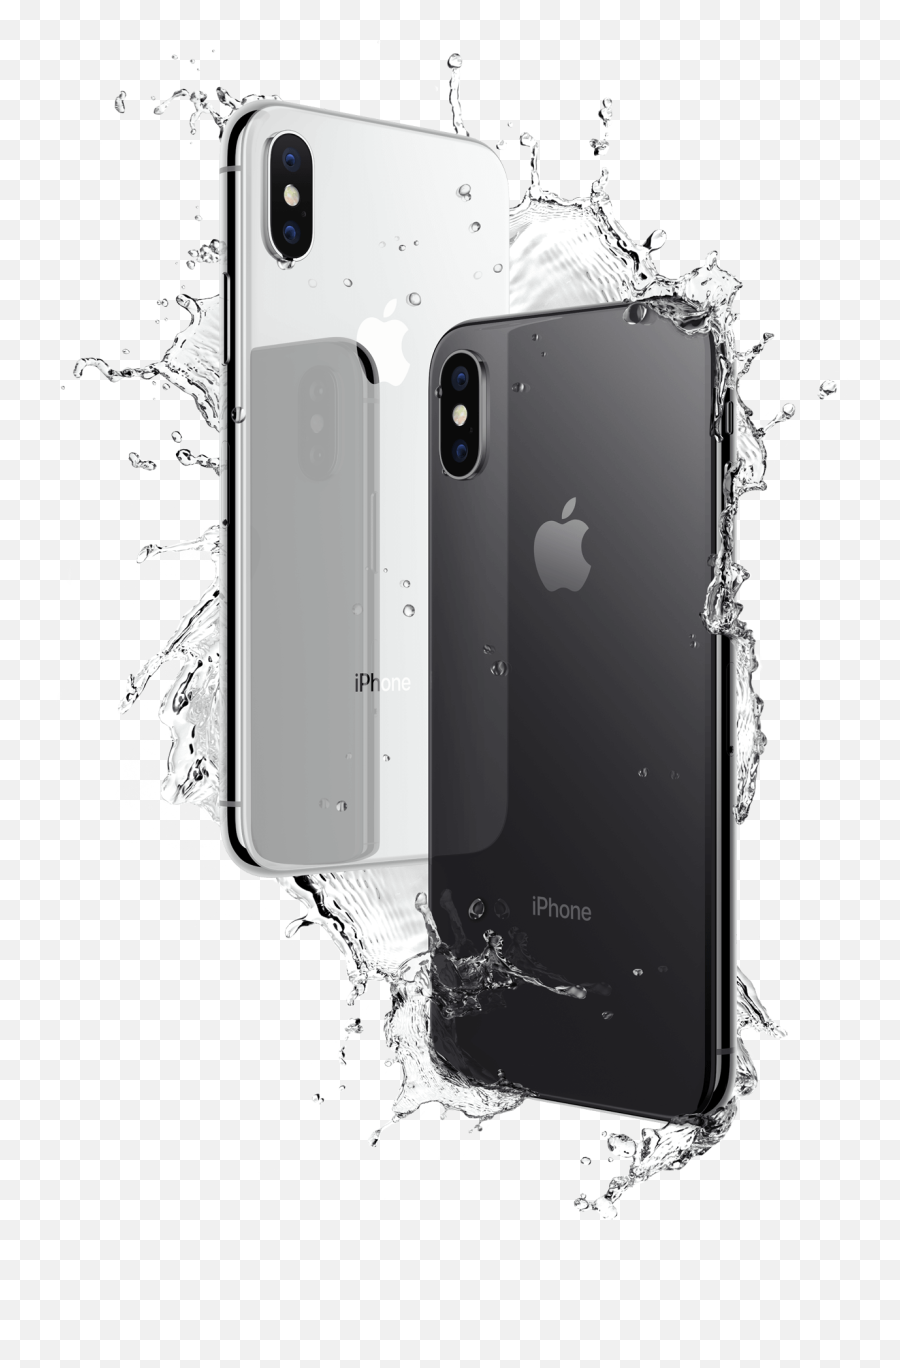 Apple Iphone X The Good Guys - Iphone Xs Space Grey Vs Silver Png,Iphone X Transparent Background